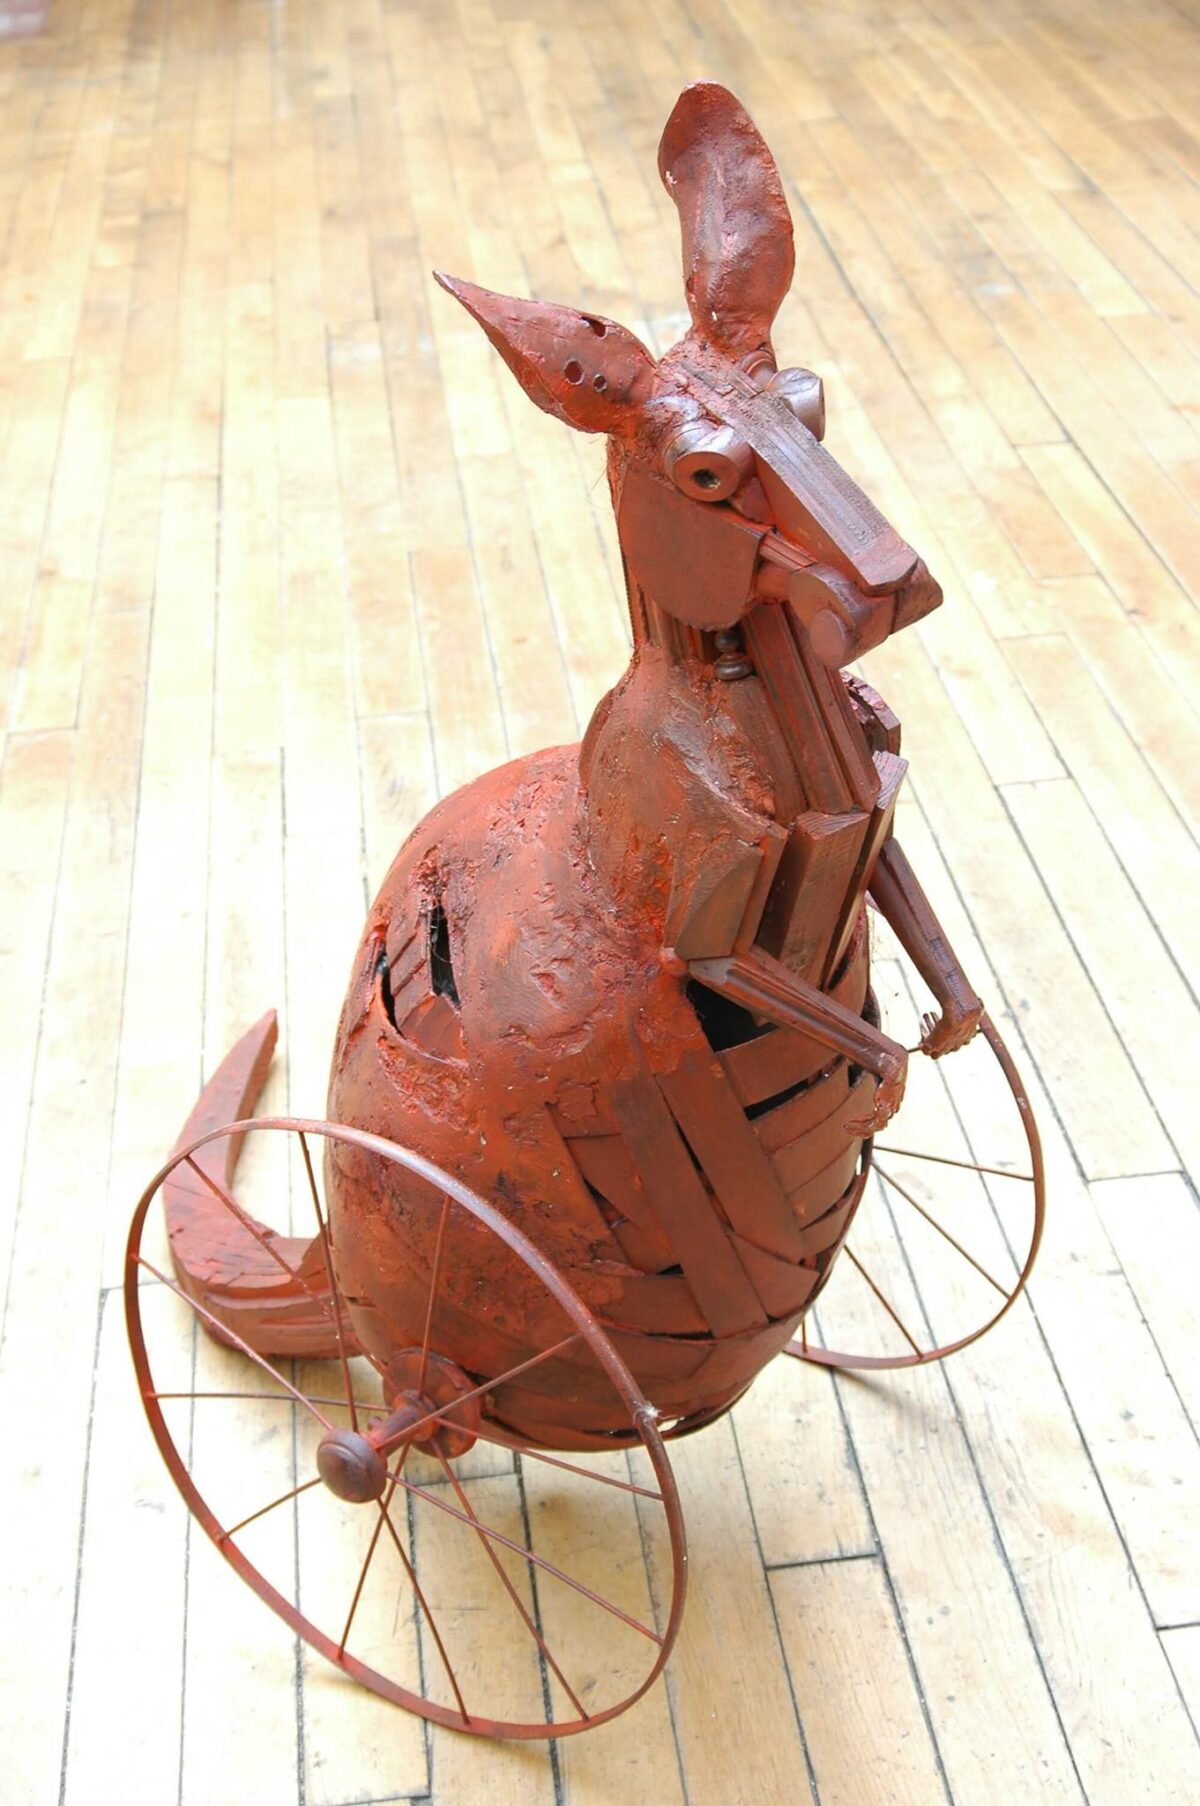 Superb Figurative Sculptures Made From Recycled Materials By Jean Paul Douziech (6)